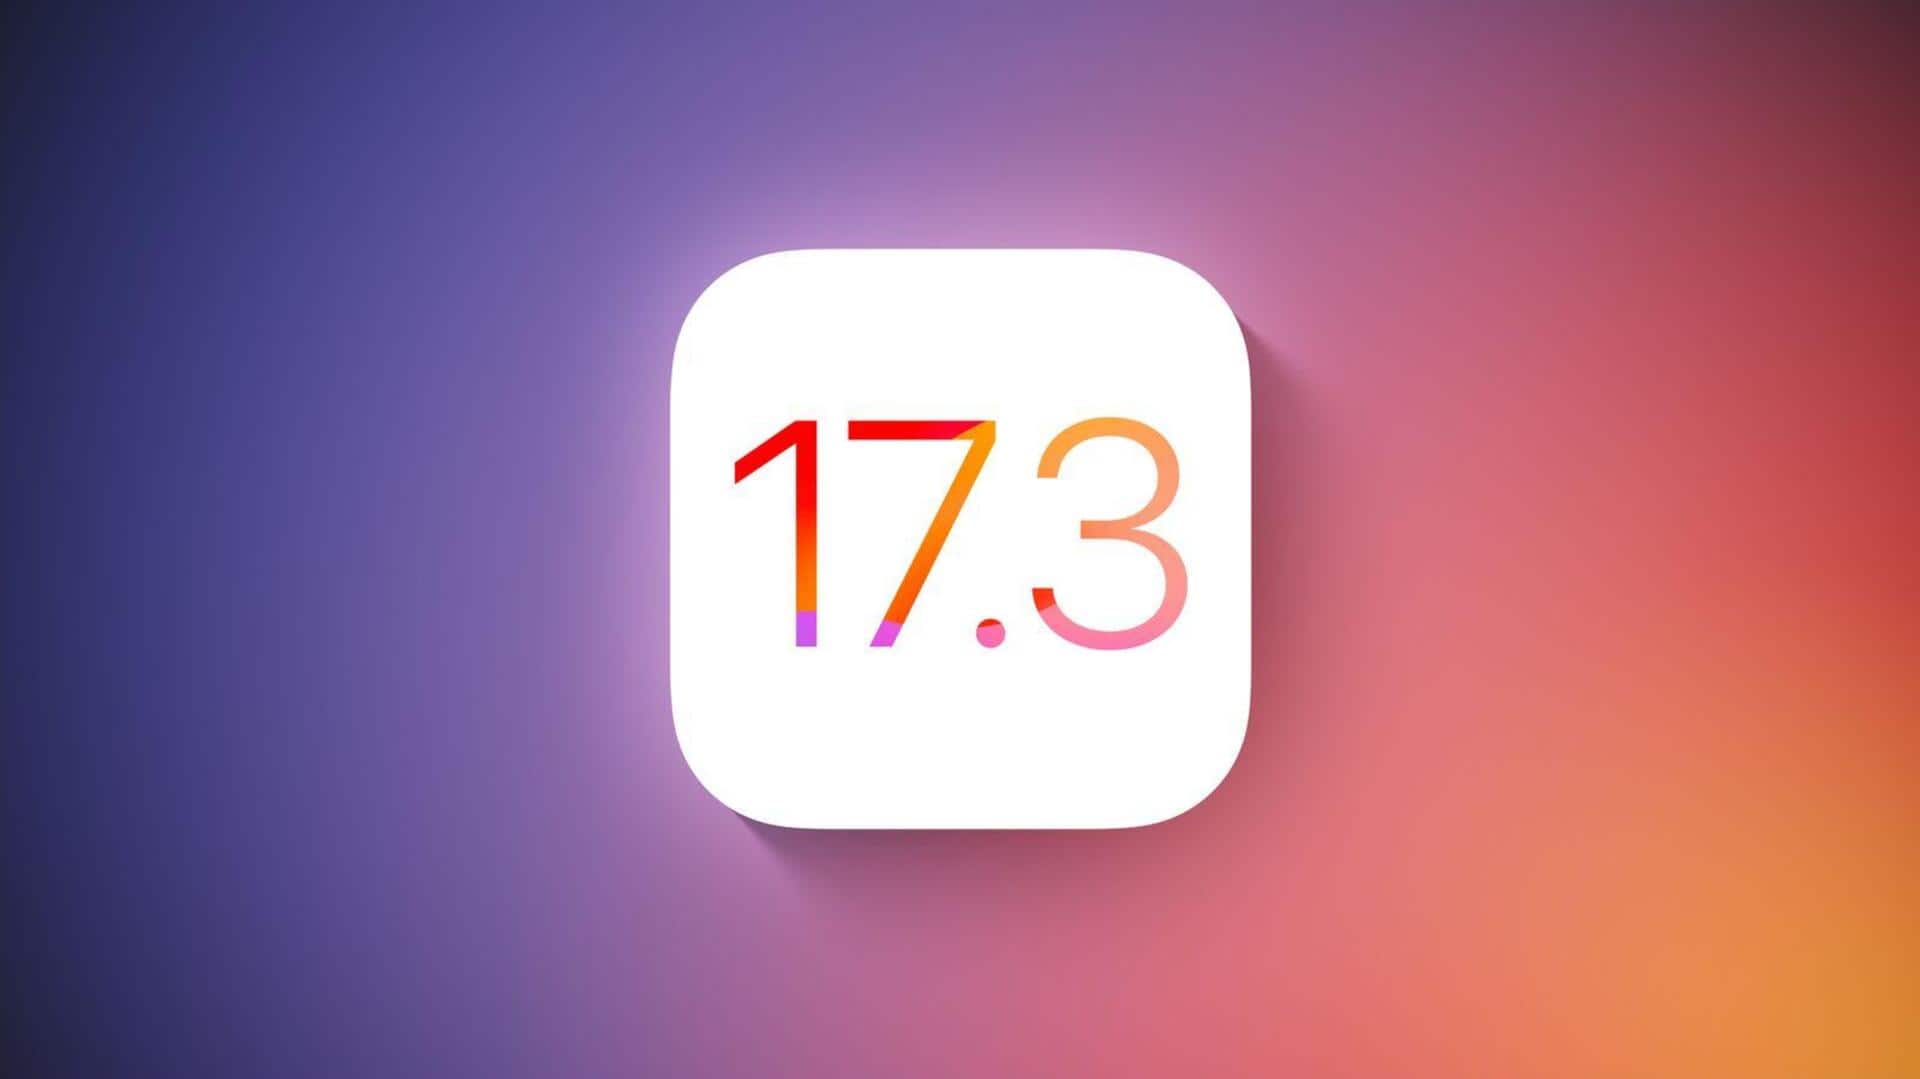 Apple's iOS 17.3 release expected by January end